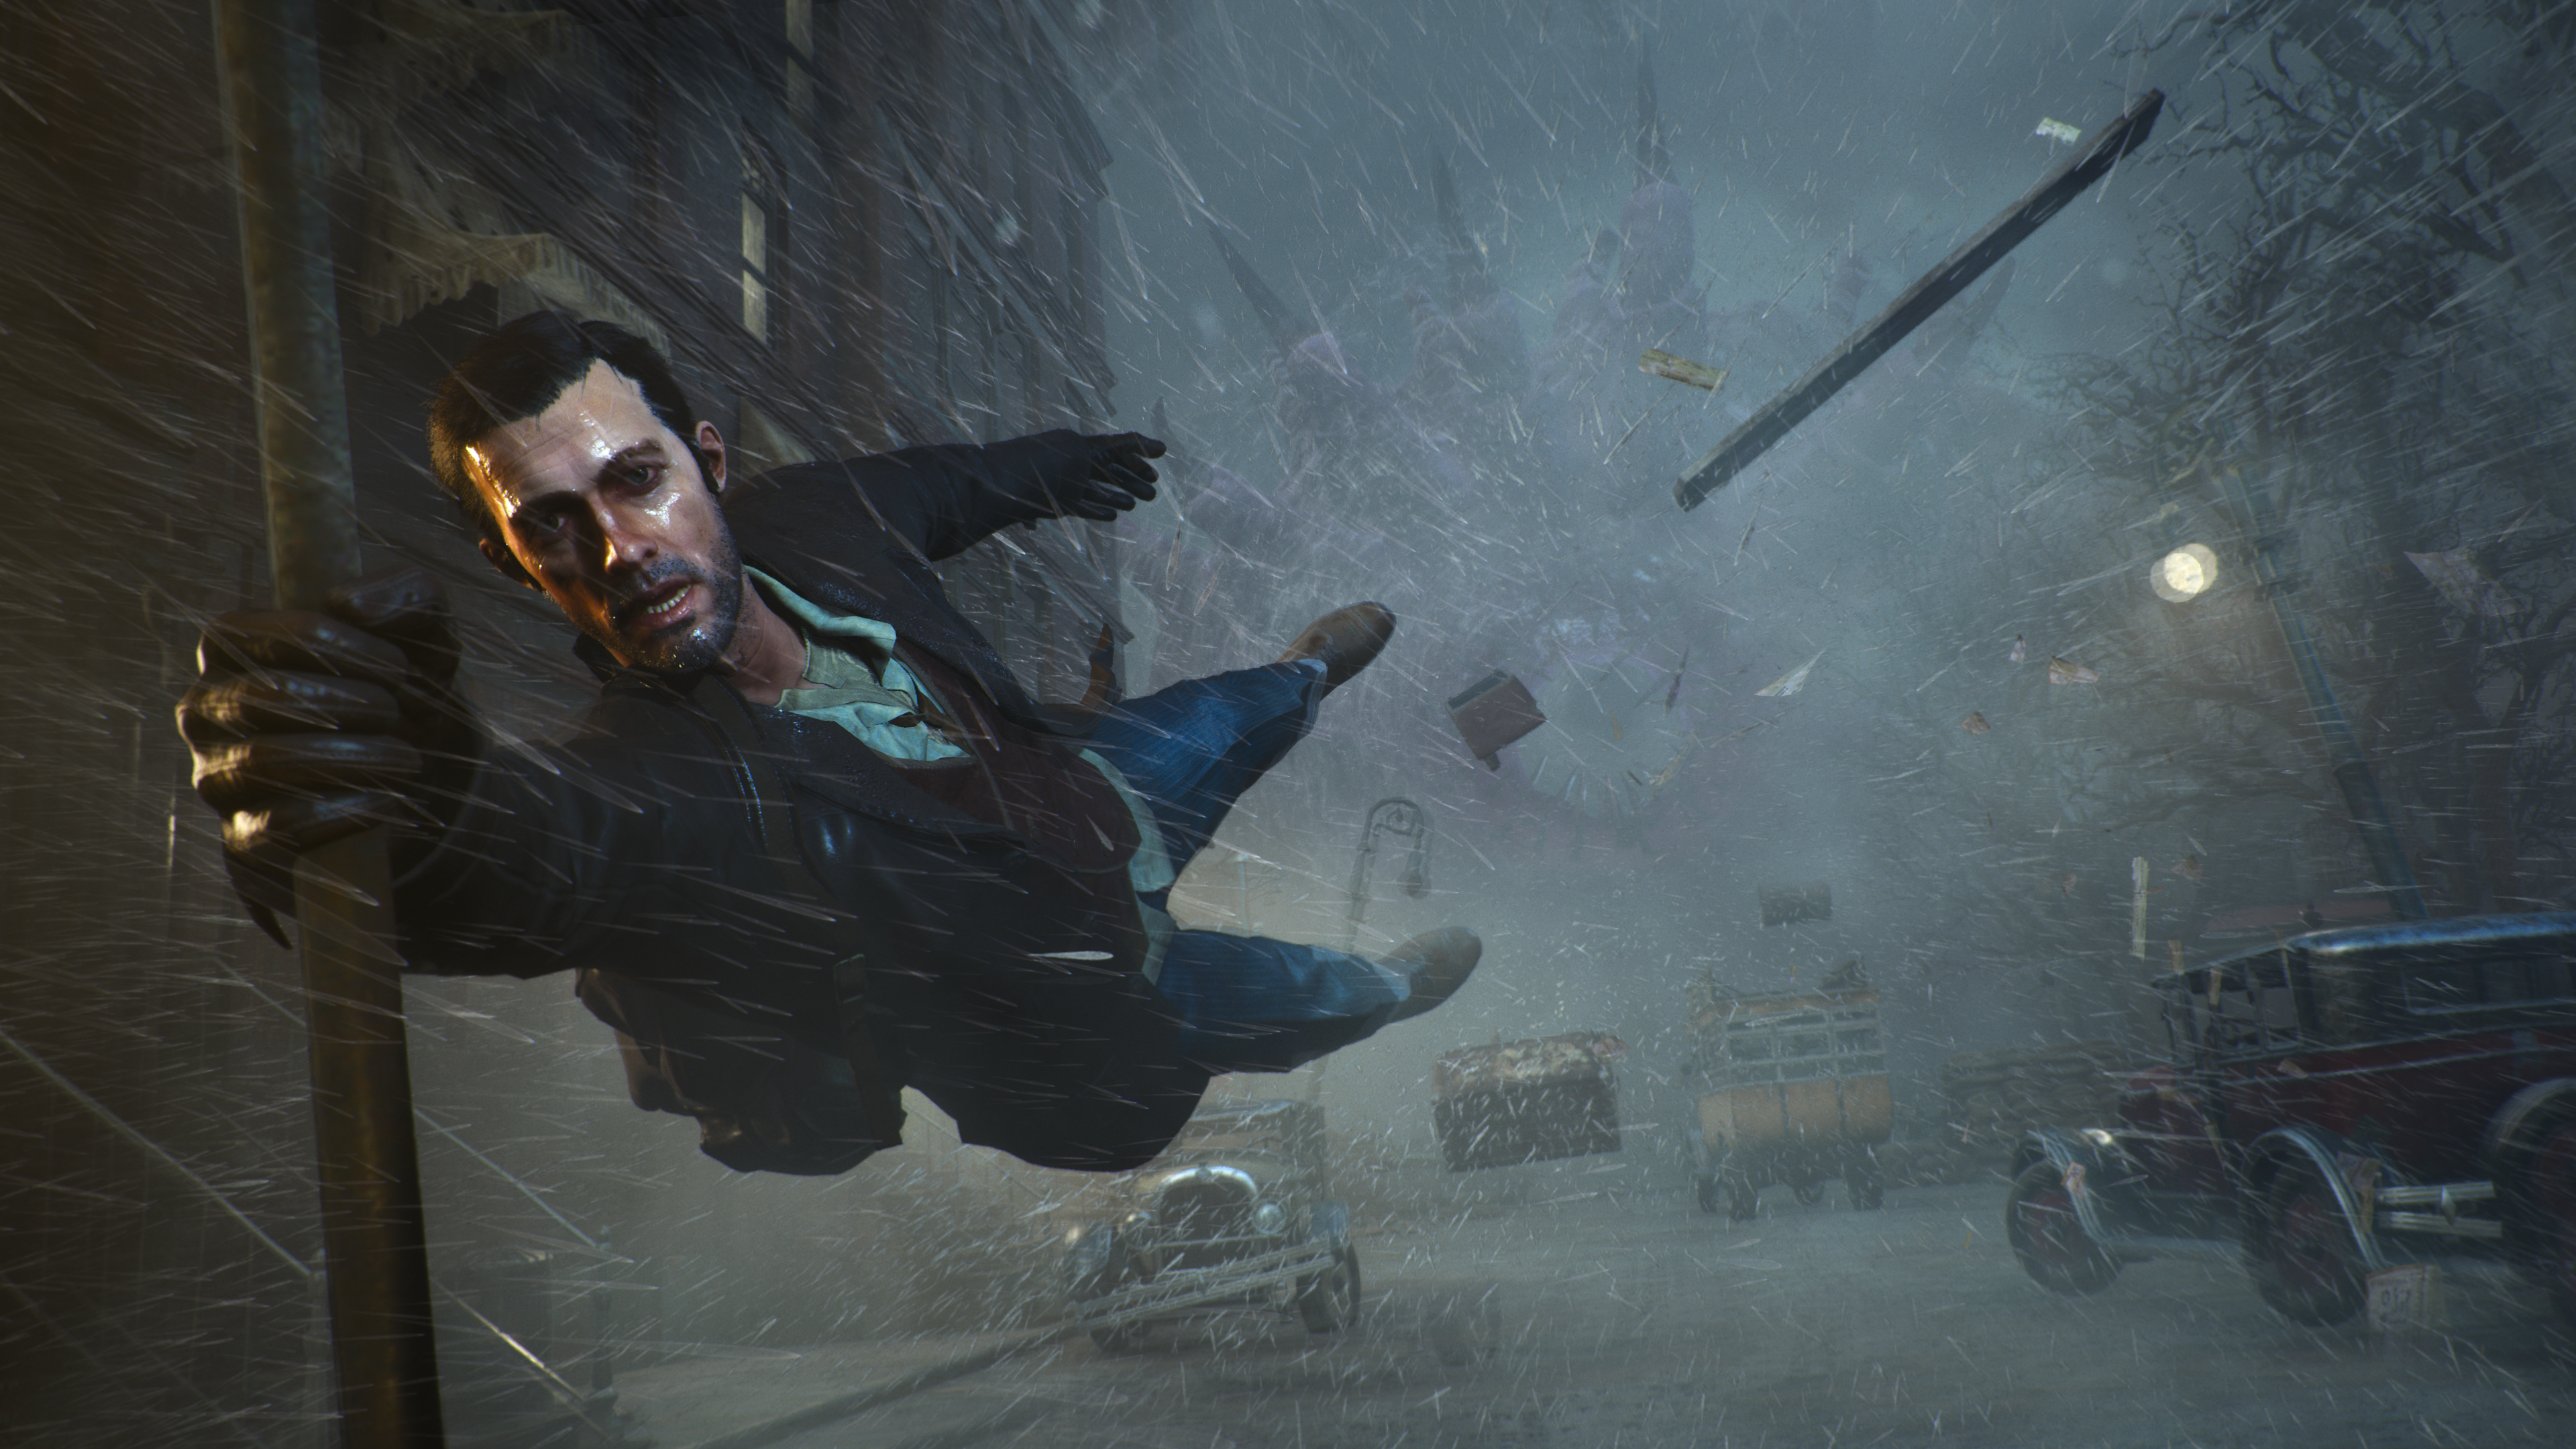 BigBen Interactive, Frogwares Games, PC, Preview, PS4, The Sinking City, Xbox OneBigBen Interactive, Frogwares Games, PC, Preview, PS4, The Sinking City, Xbox One